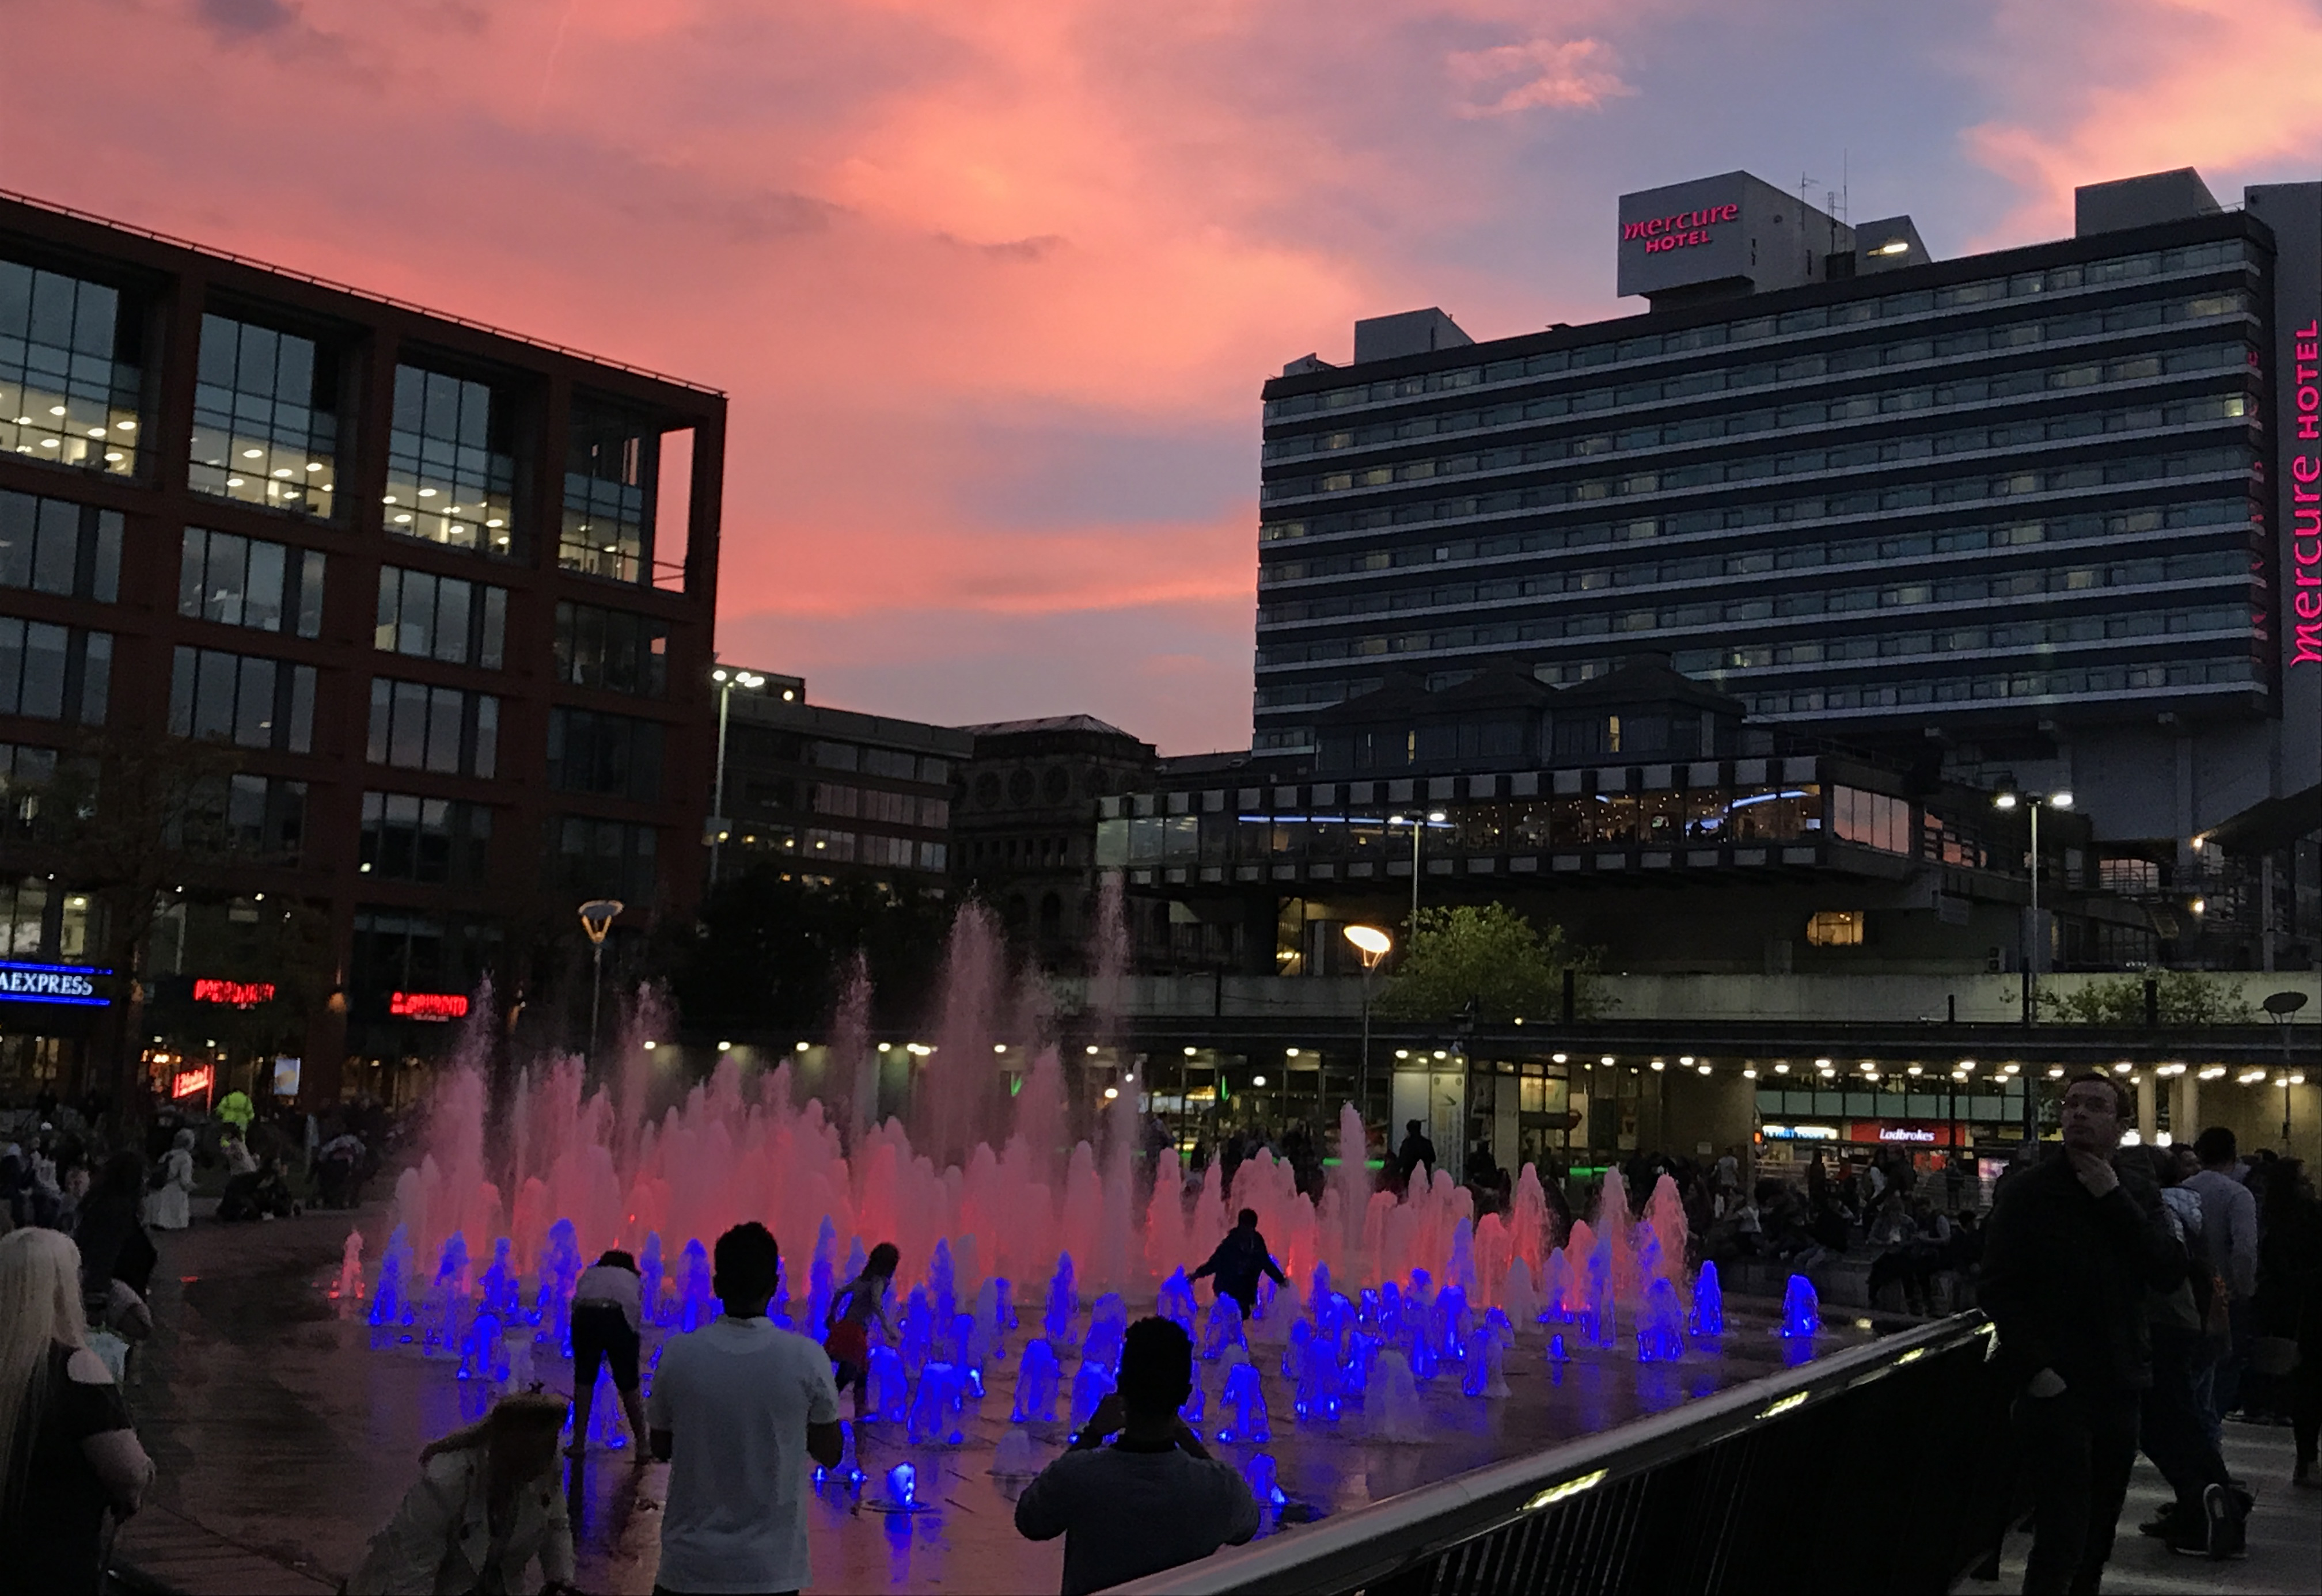 Image: Piccadilly Gardens